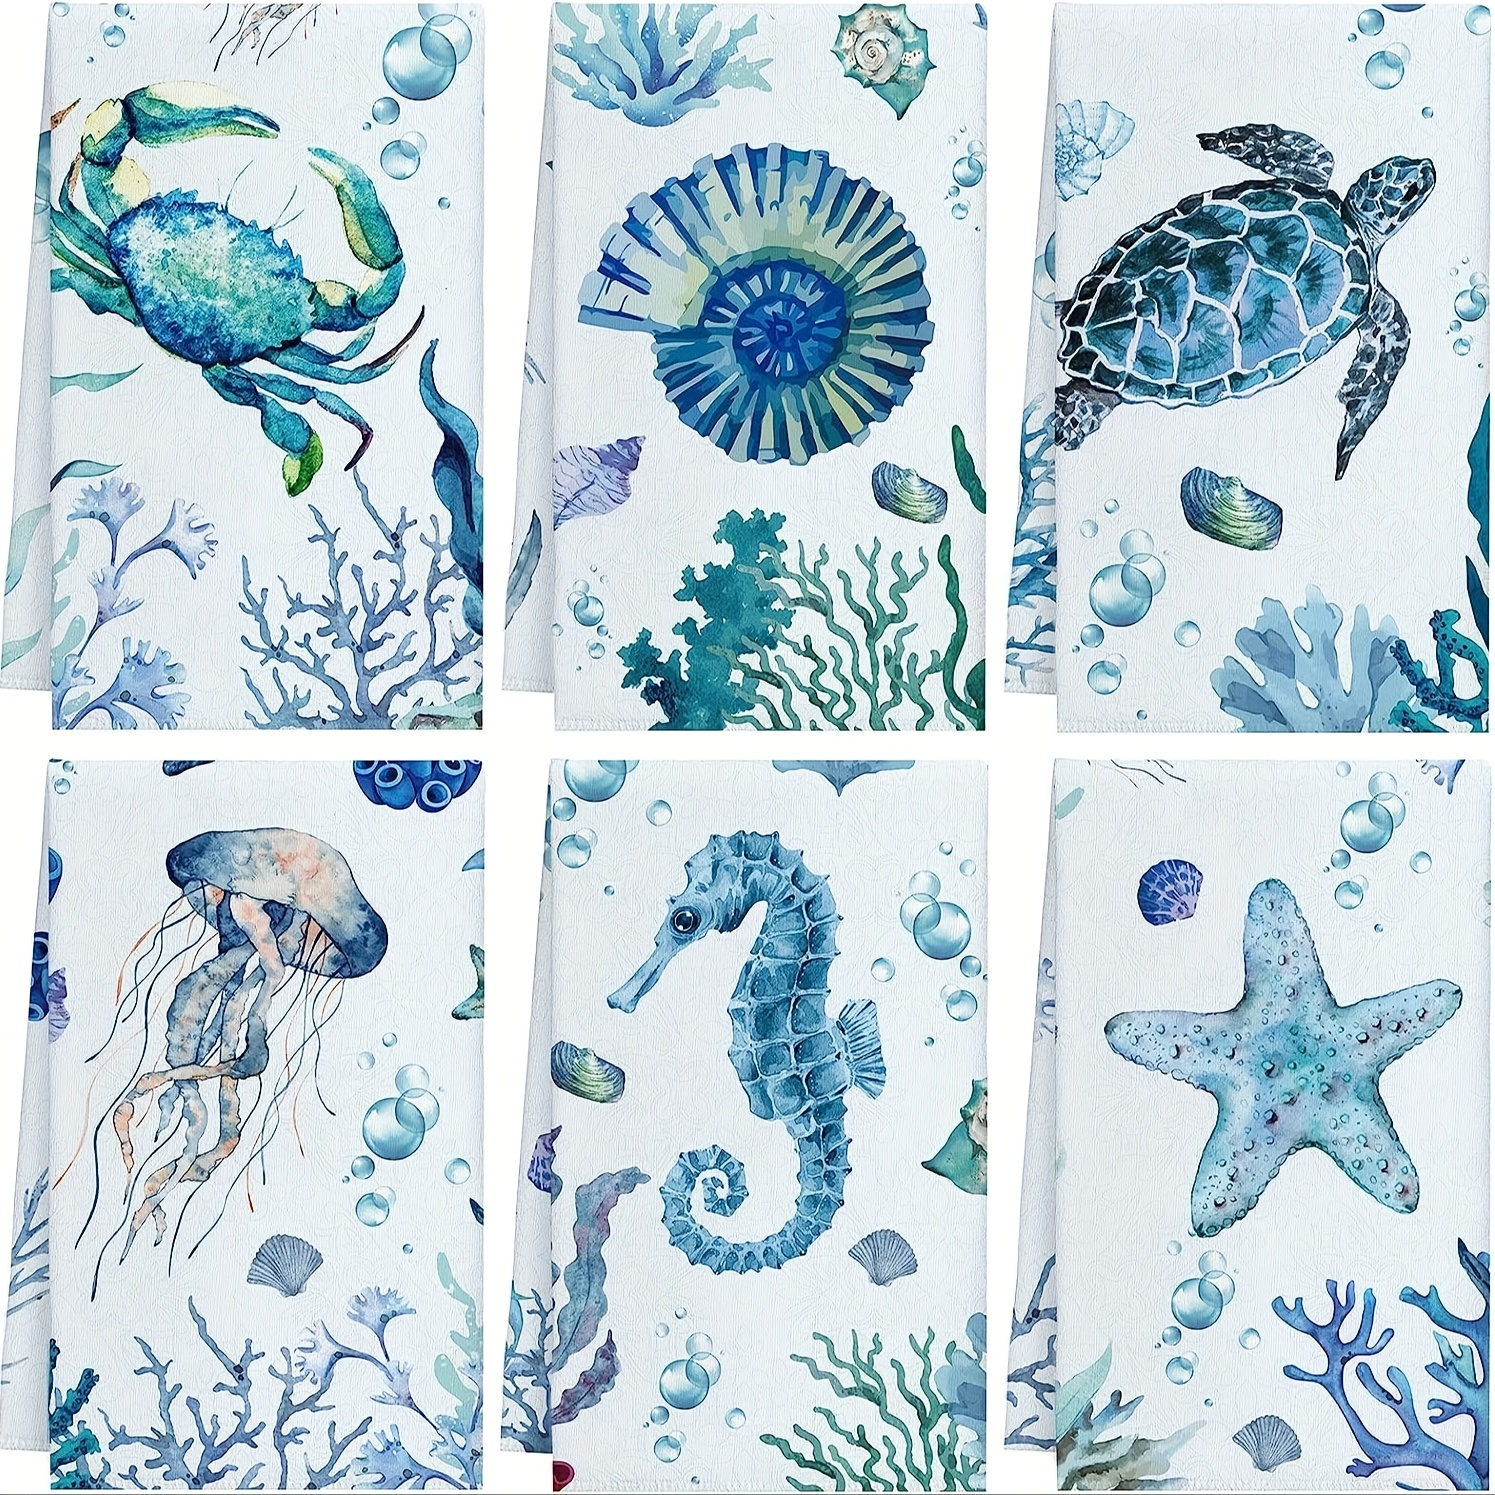 

6pcs Sea Animal Printed Kitchen Fingertip Towels, Absorbent & Comfortable Hand Towels, Decorative Tea Towels Gift Perfect For Neighbors And Friends, Kitchen Decor, Home Supplies